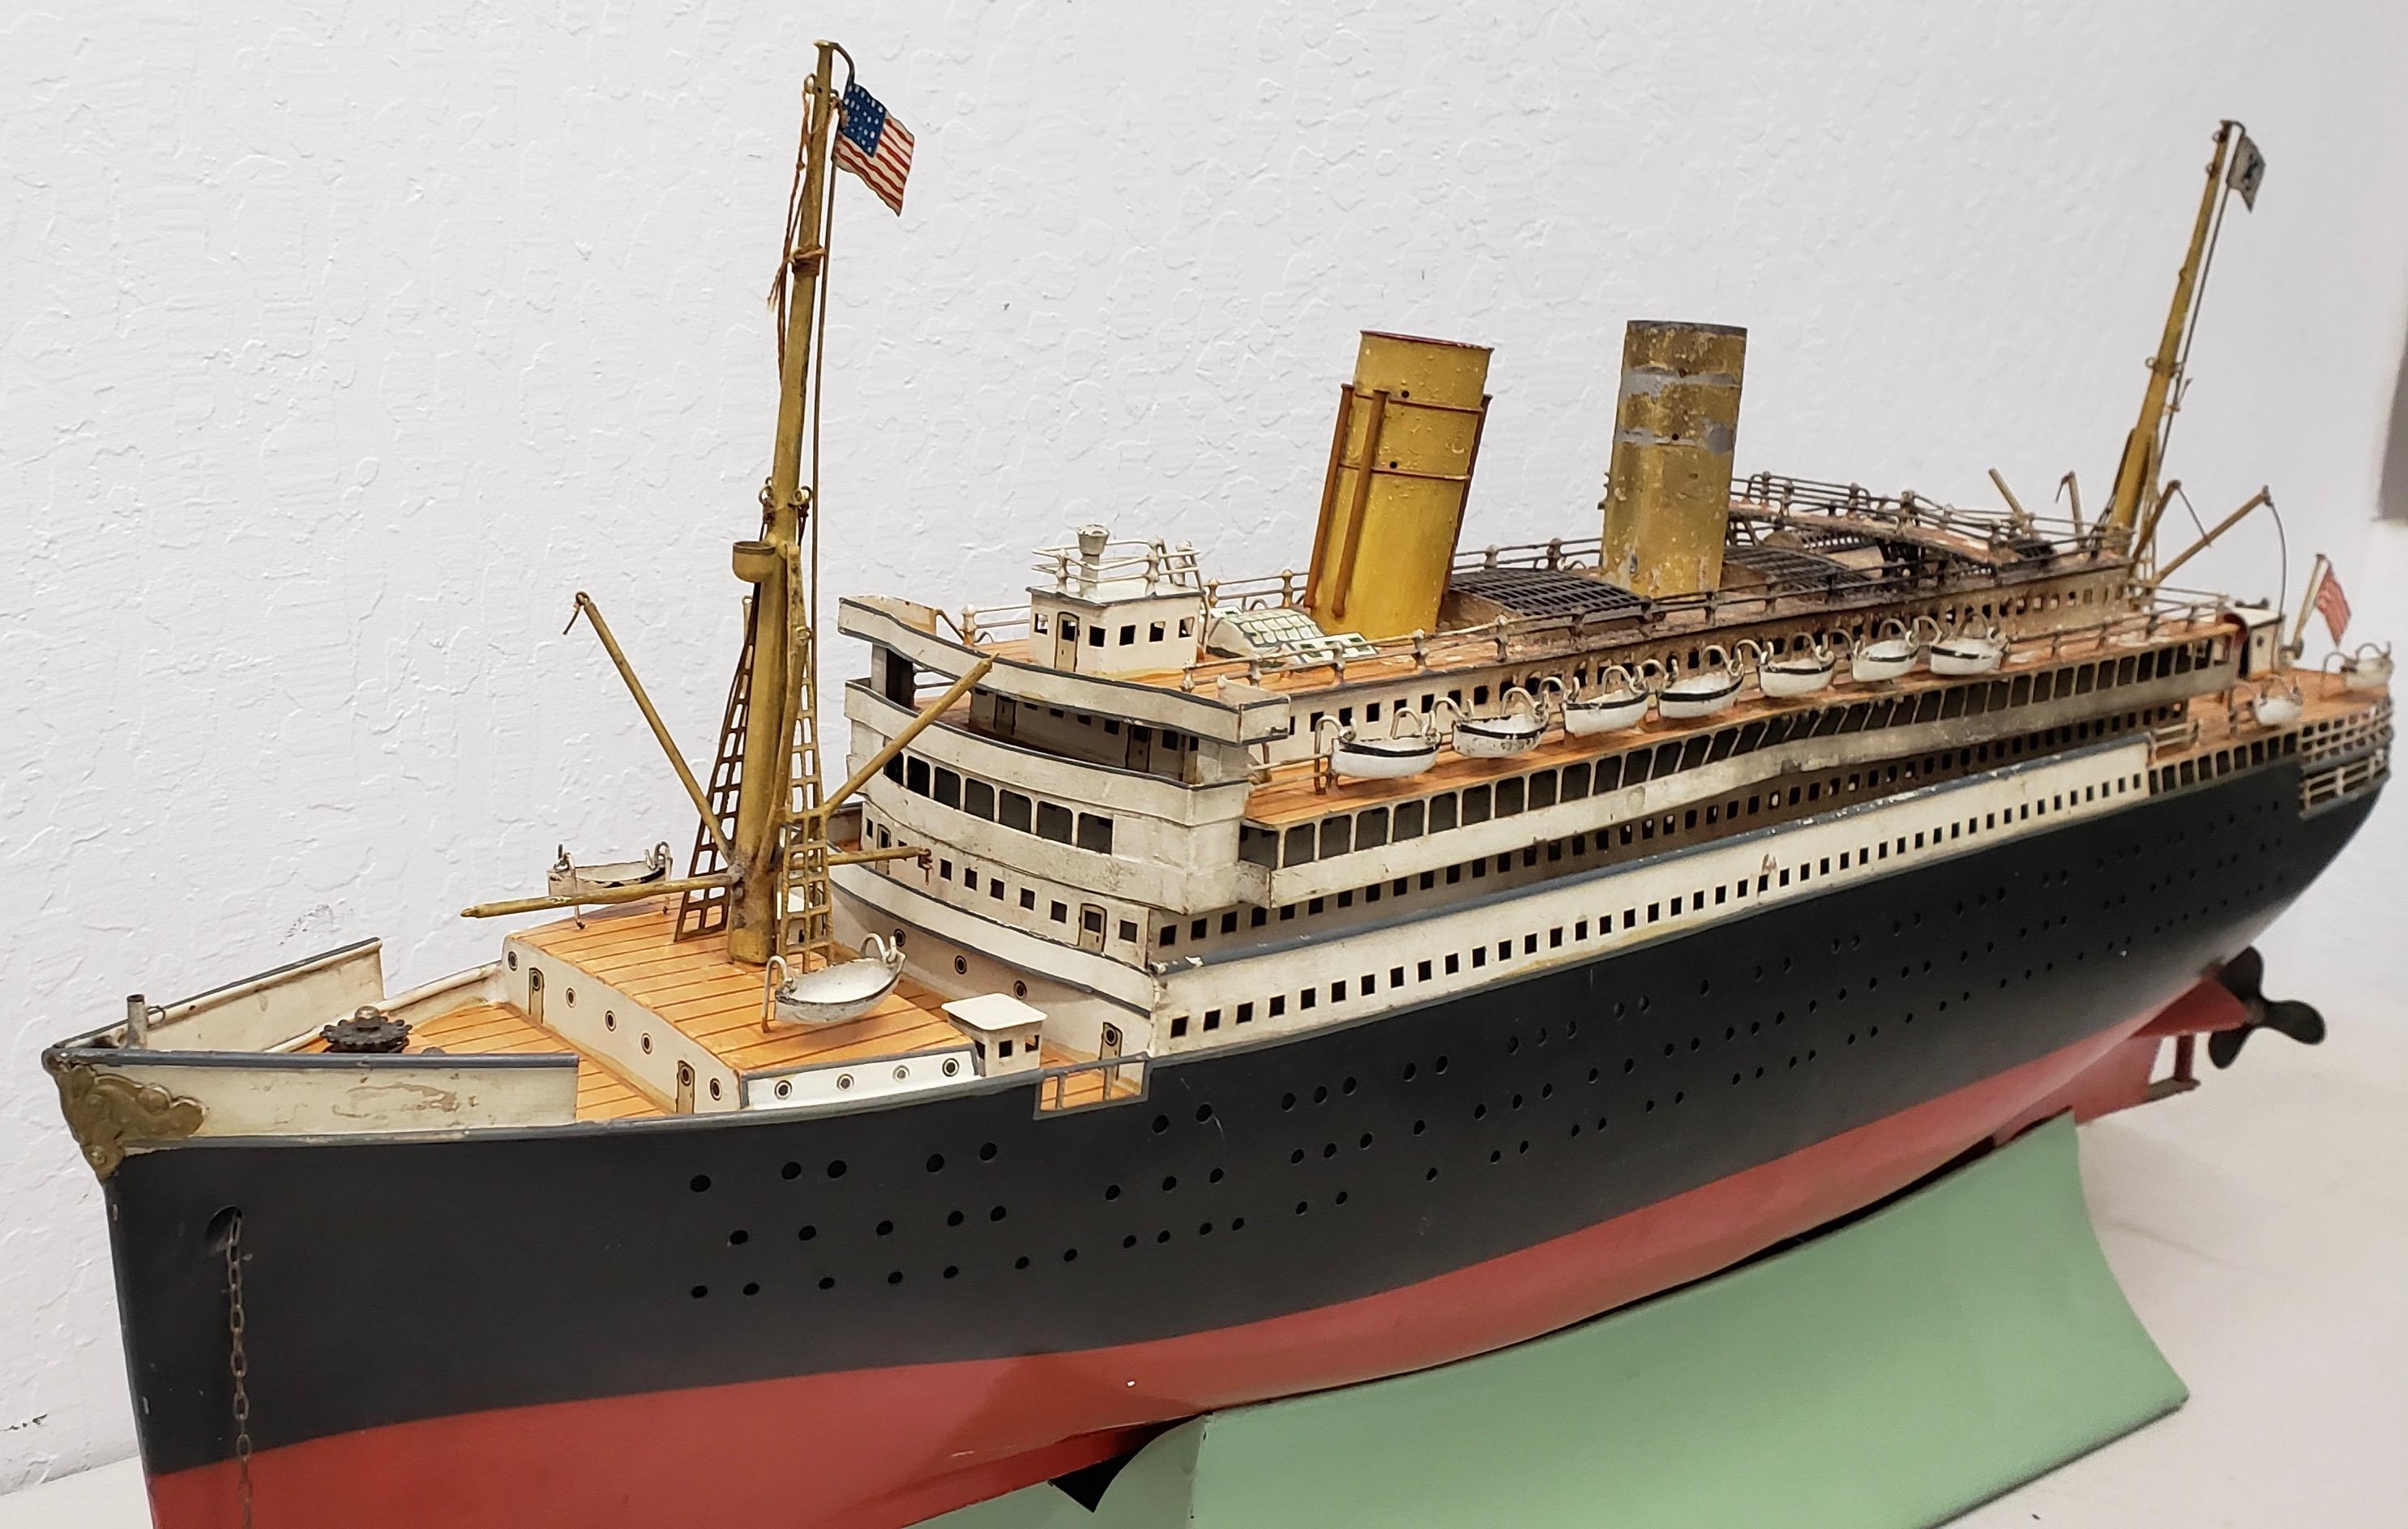 Antique Marklin Ocean Liner with American flags and lifeboats circa 1900
Original Travel Agency Model - No Motor - Wired Interior for Lighting

Antique Marklin Ocean Liner with American flags and lifeboats circa 1900

There are 12 lifeboats and